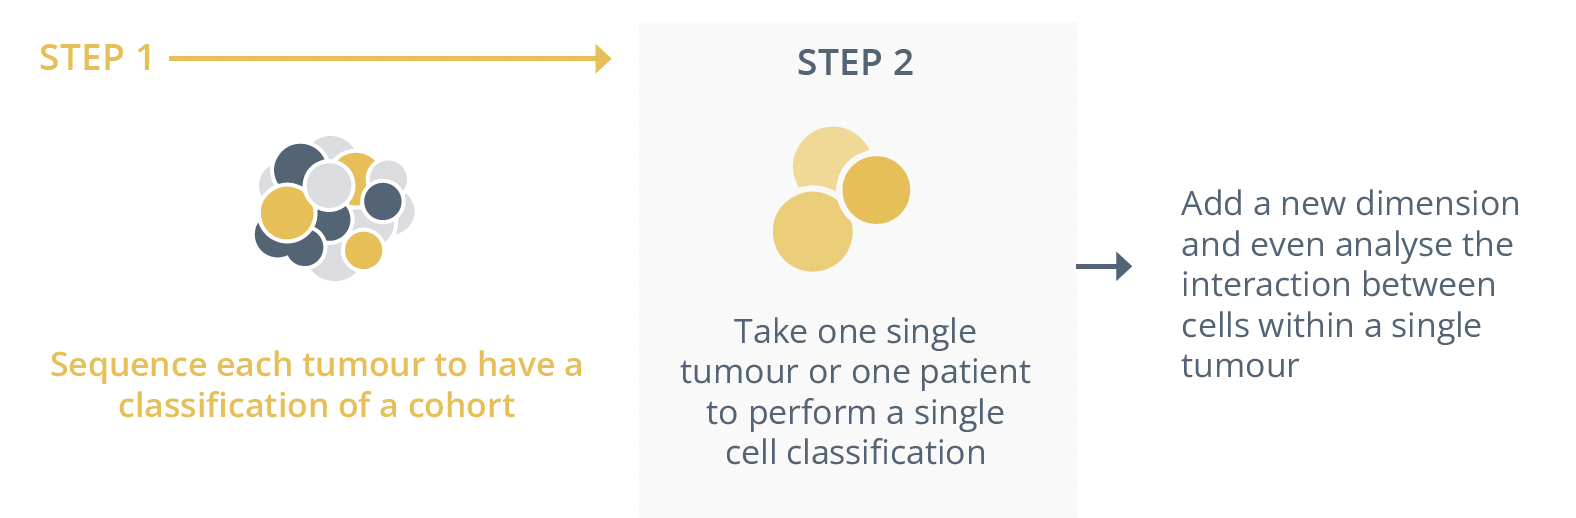 Step 1 would be to sequence each tumour to have a classification of a cohort. The second step would include taking one single tumour